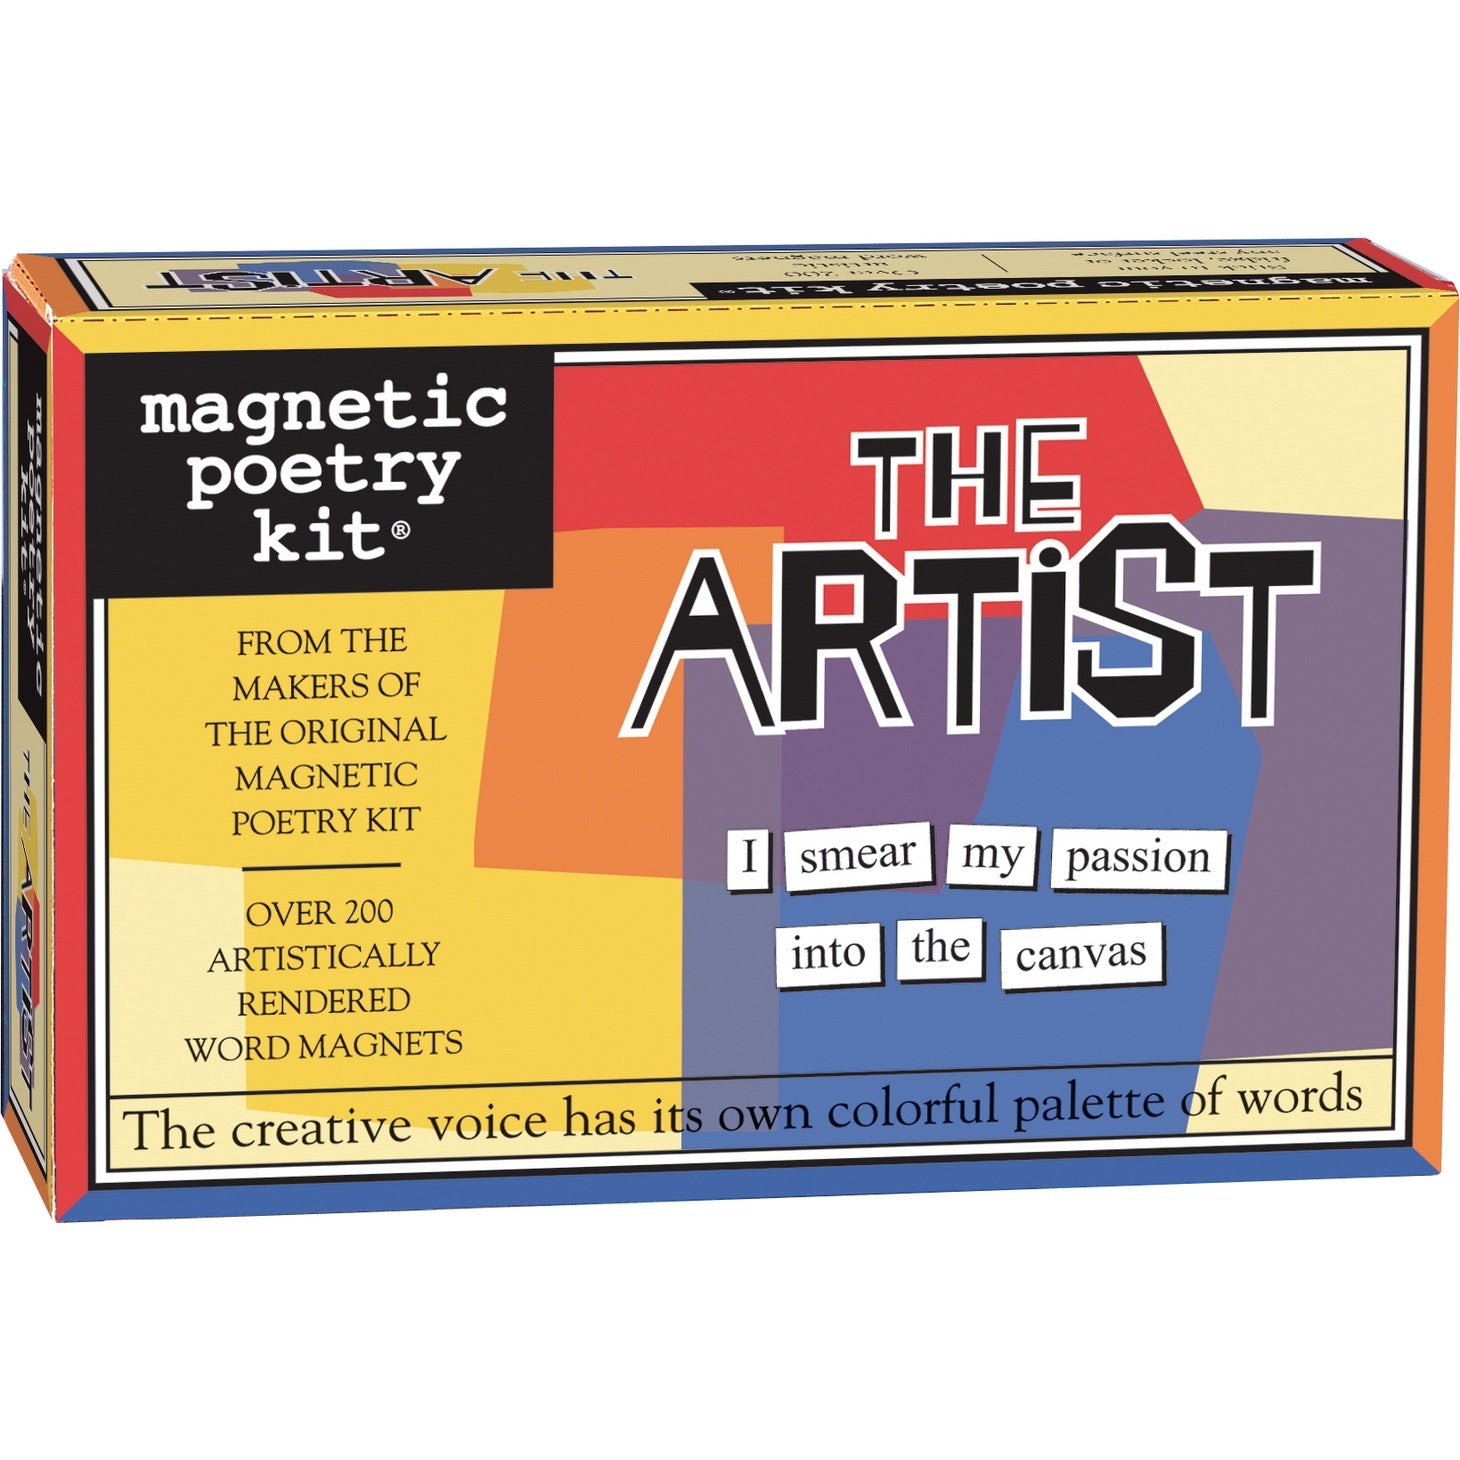 “The Artist” Magnetic Poetry Kit - by Magnetic Poetry, Inc - K. A. Artist Shop